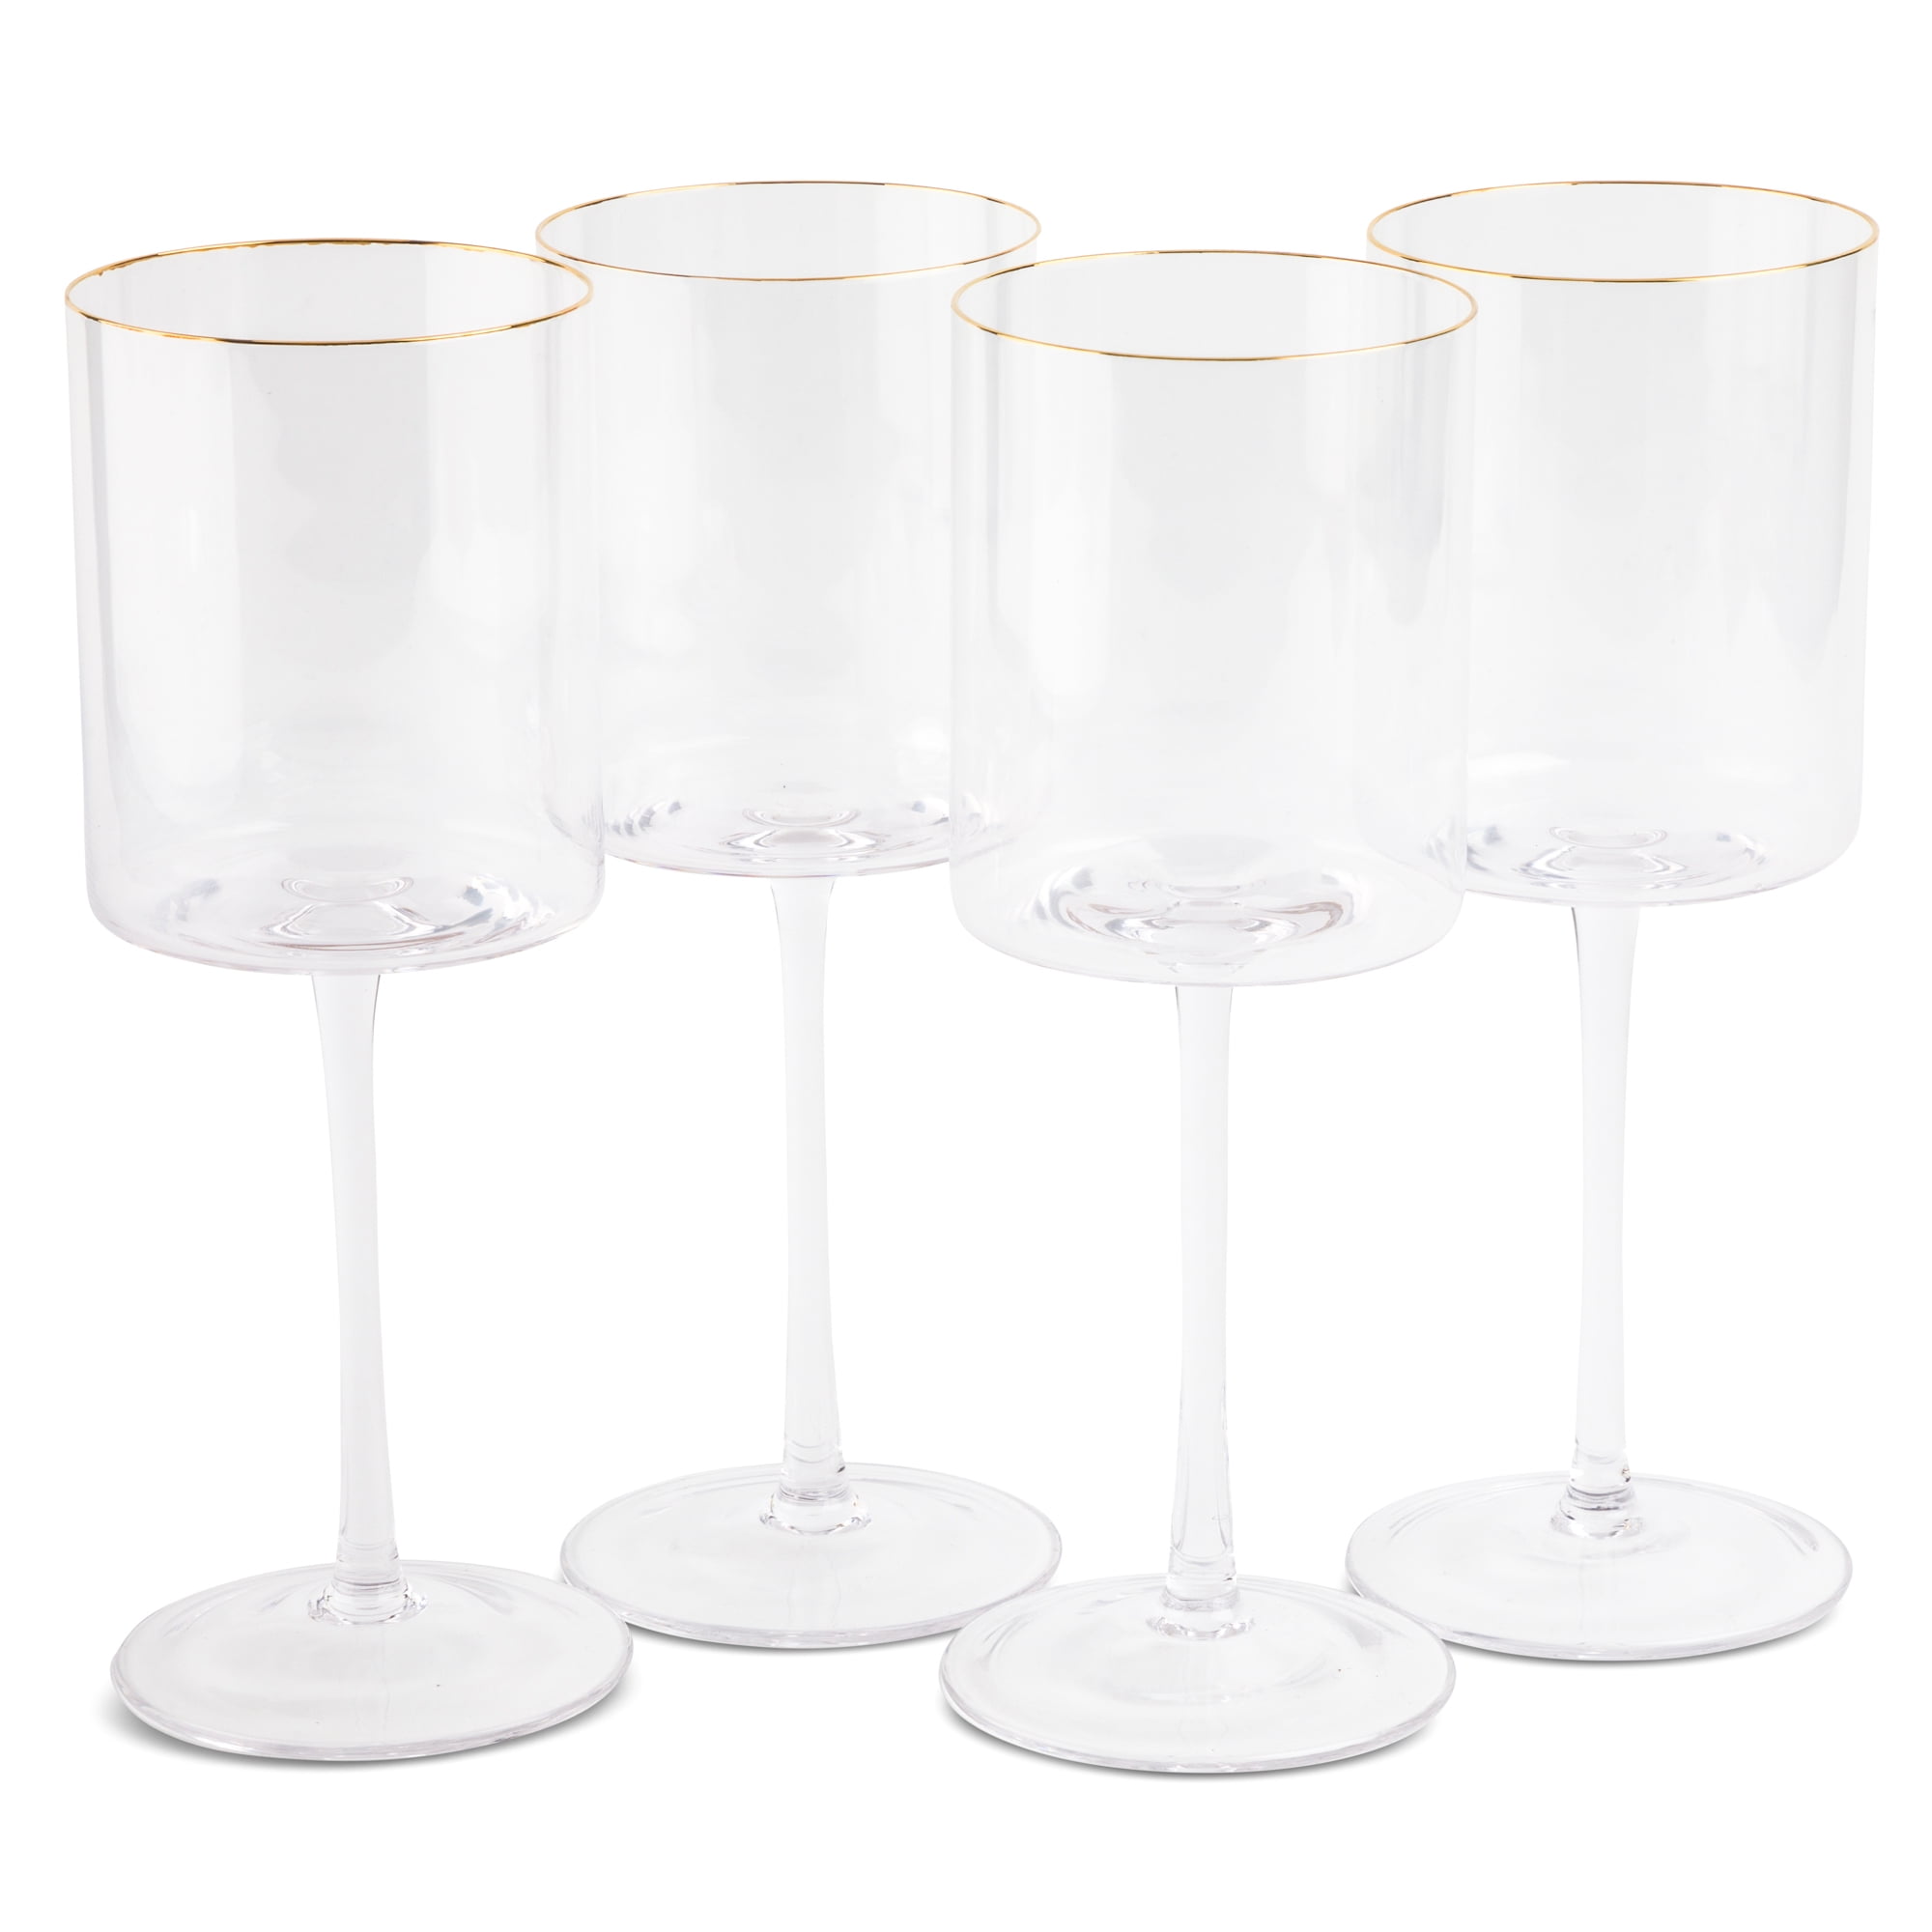 Customized Party and Wedding High-Quality Colored Wine Glasses